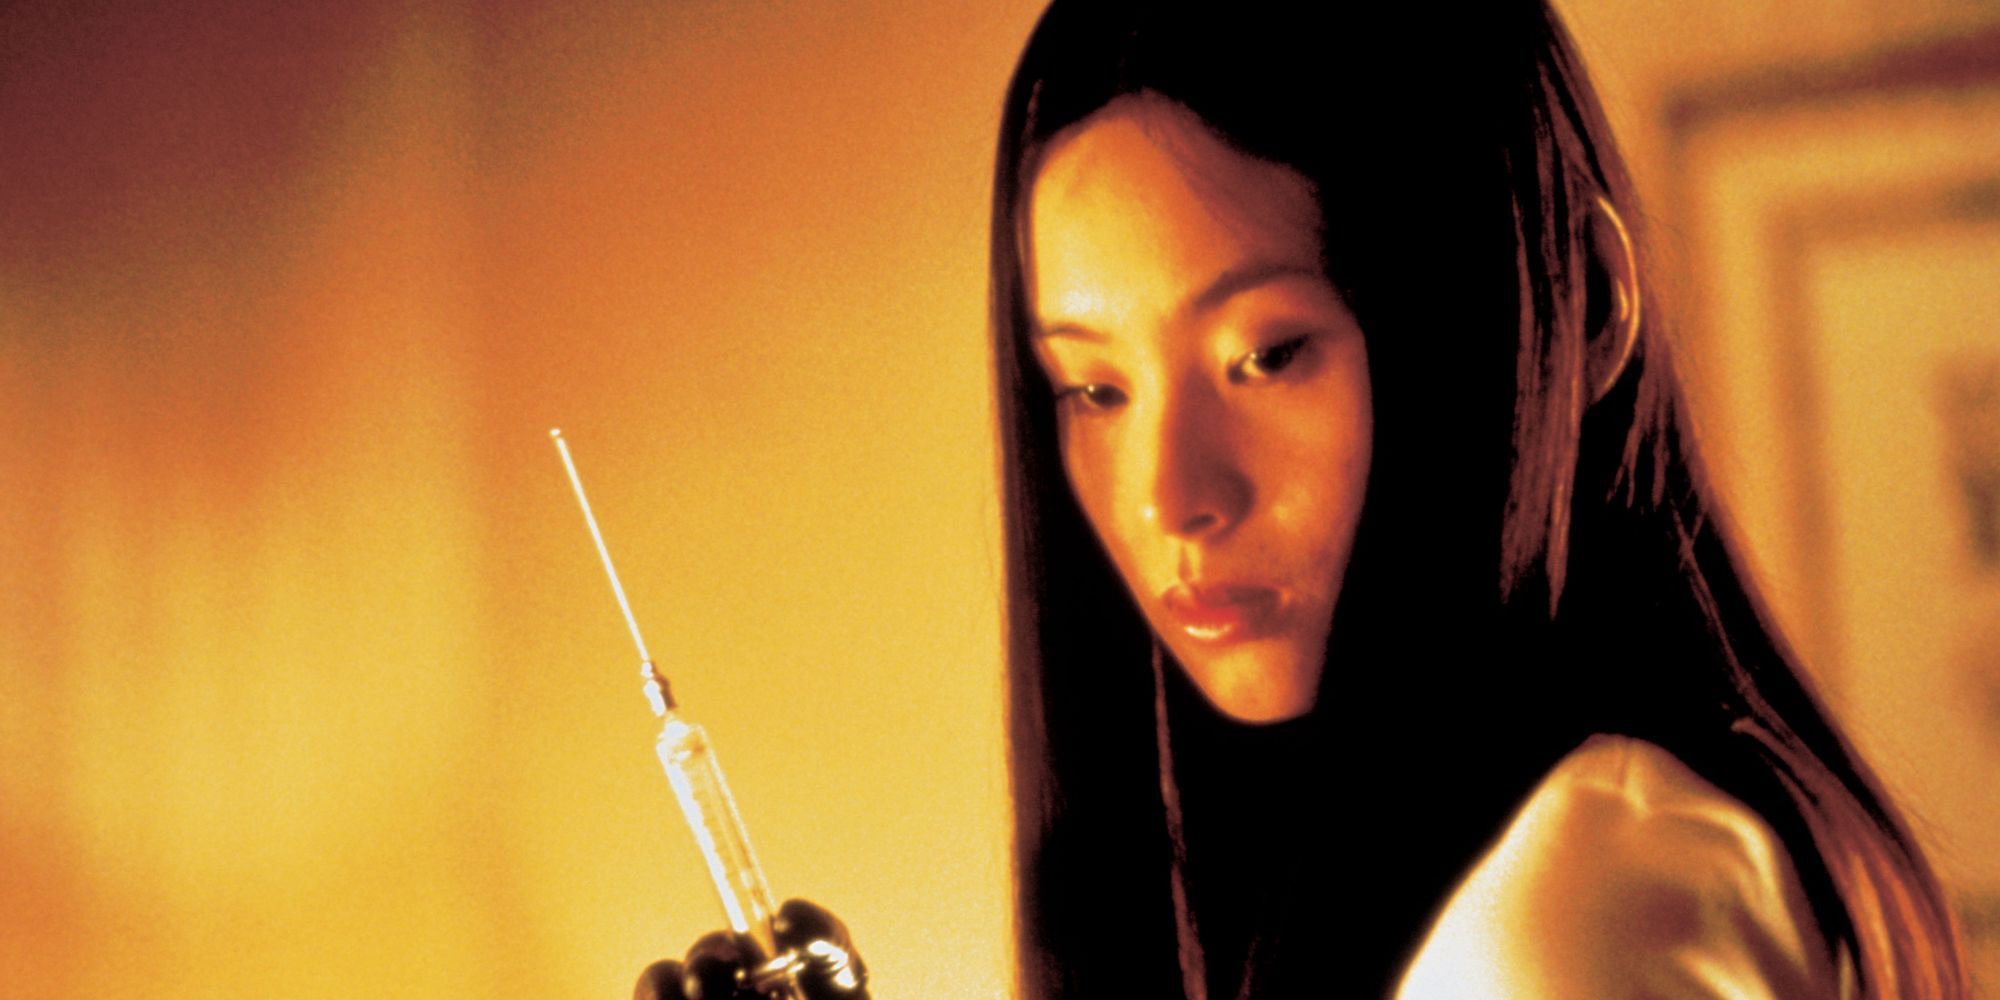 Asami from Audition holding a large syringe